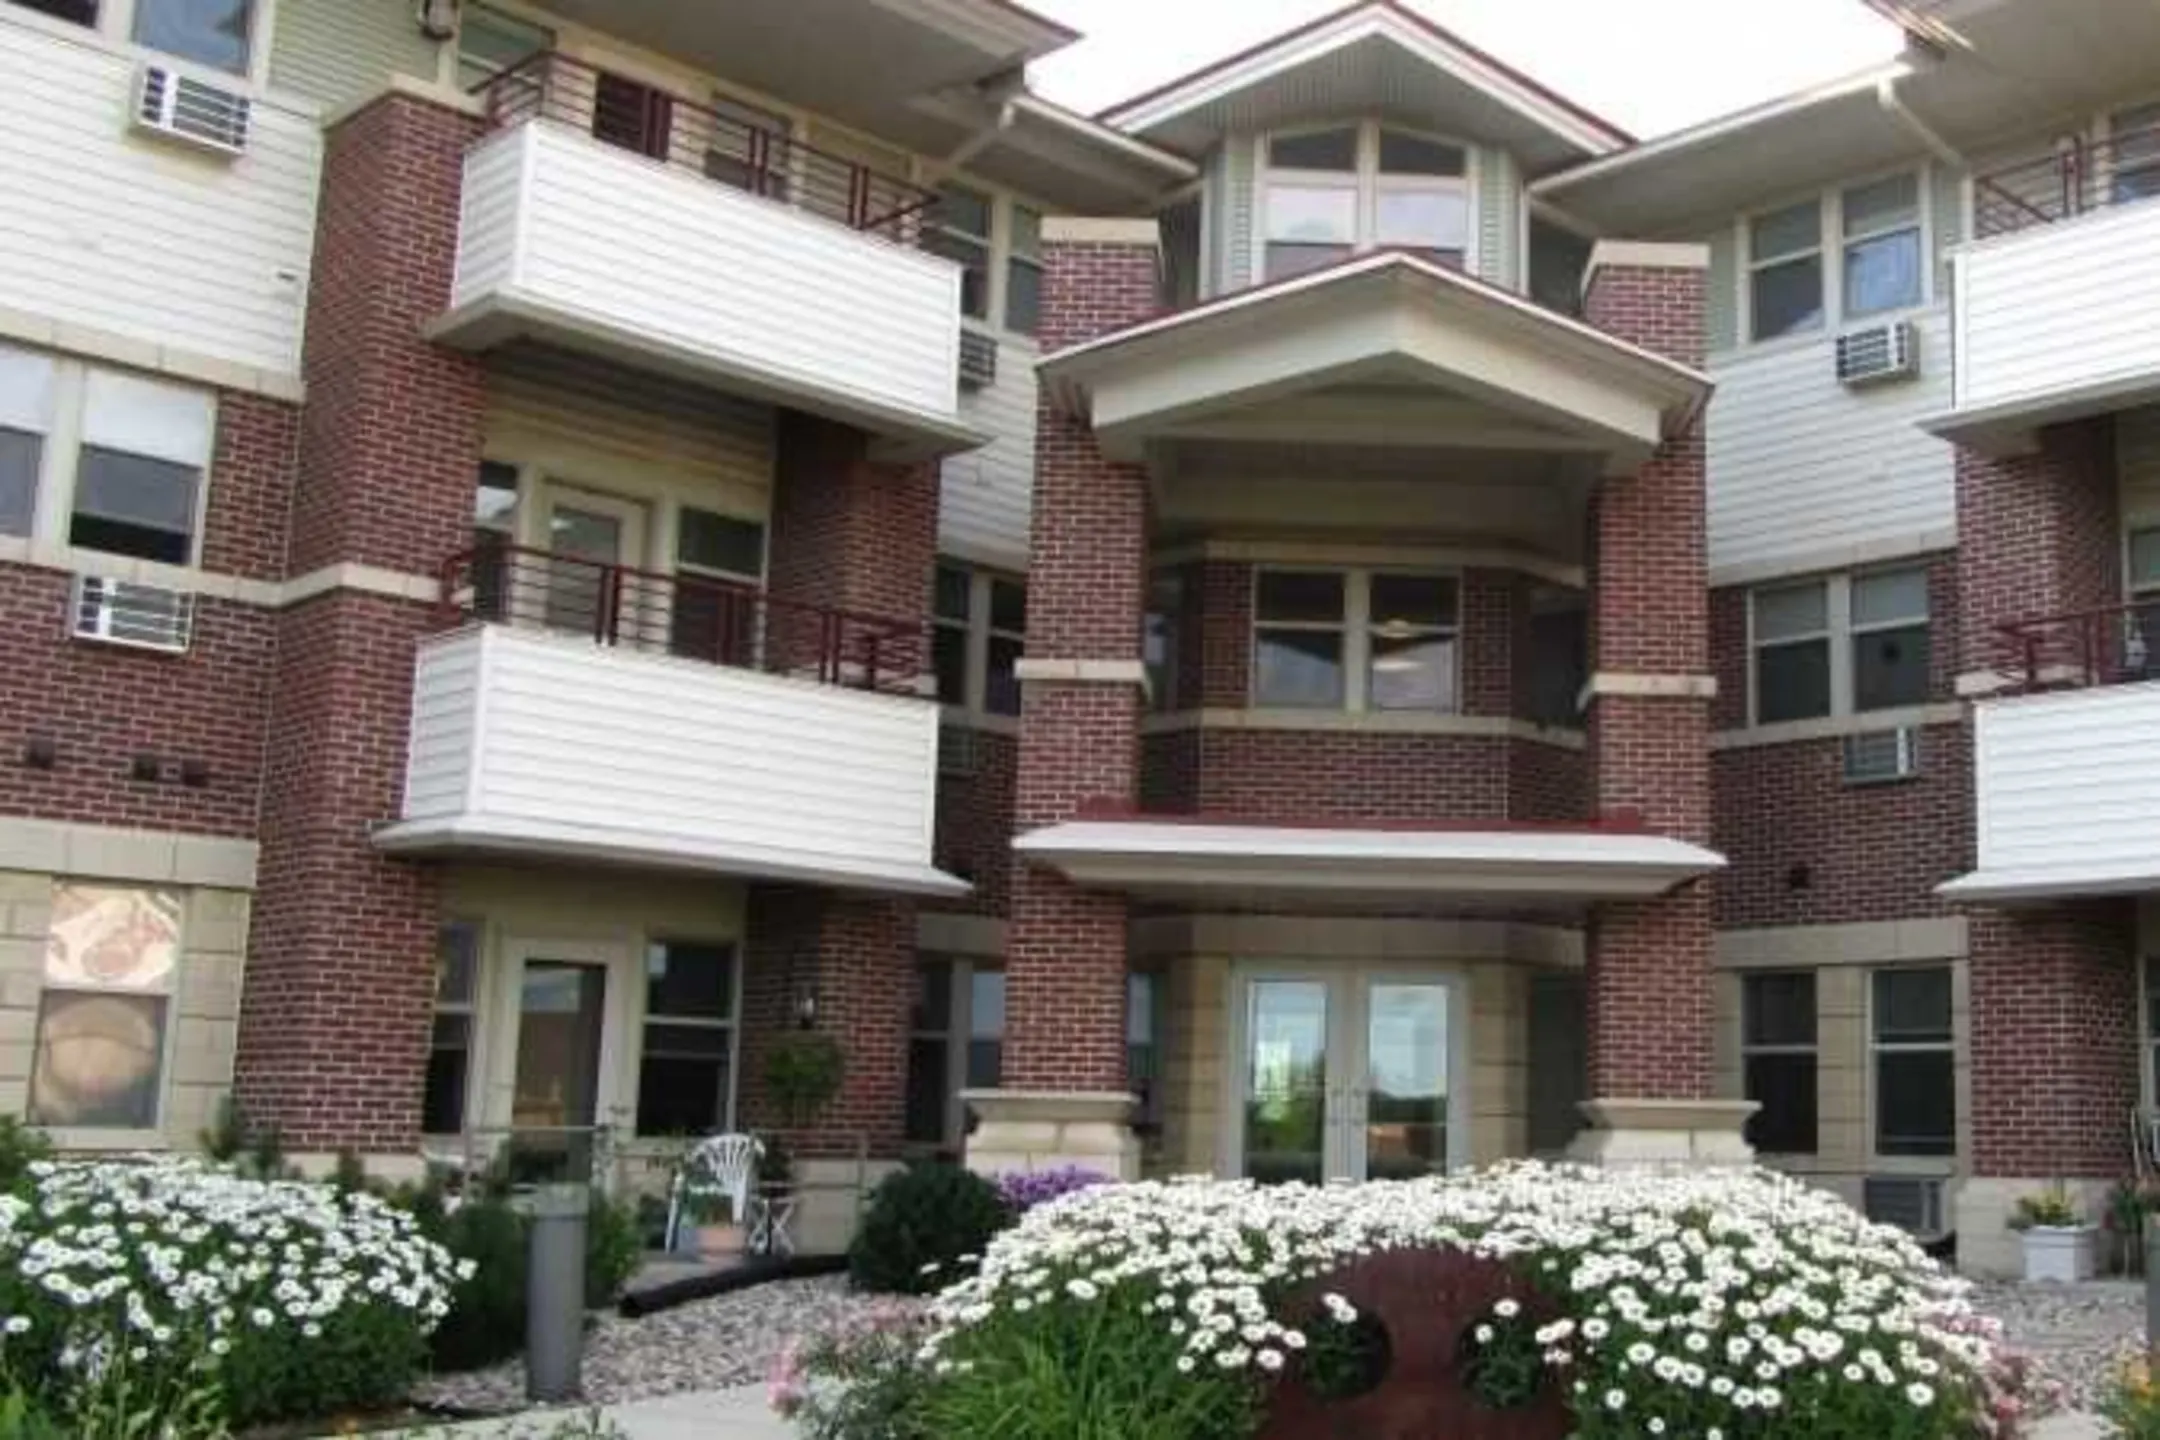 Building - Cannery Row Senior Community - Waunakee, WI